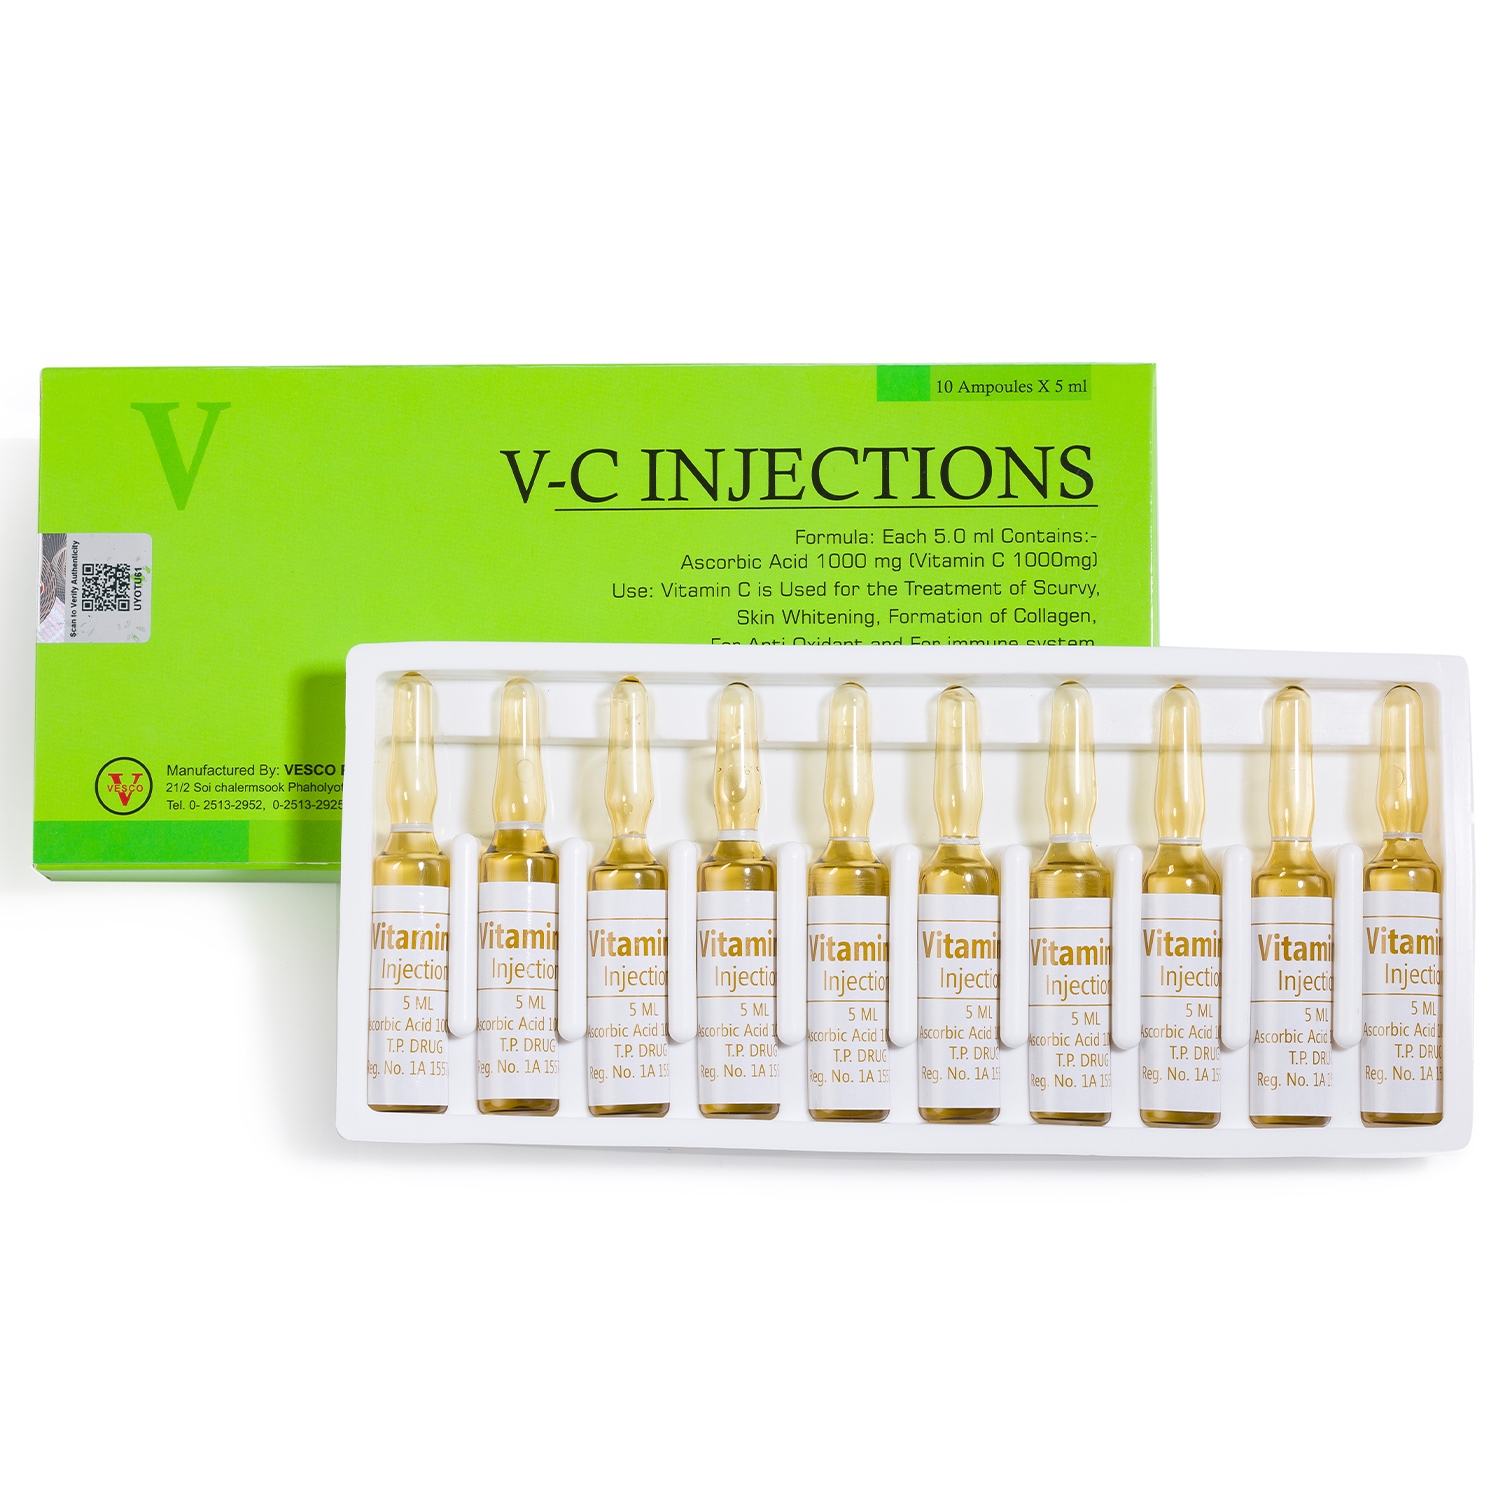 Vitamin C 1000mg Injections 10 Ampoules